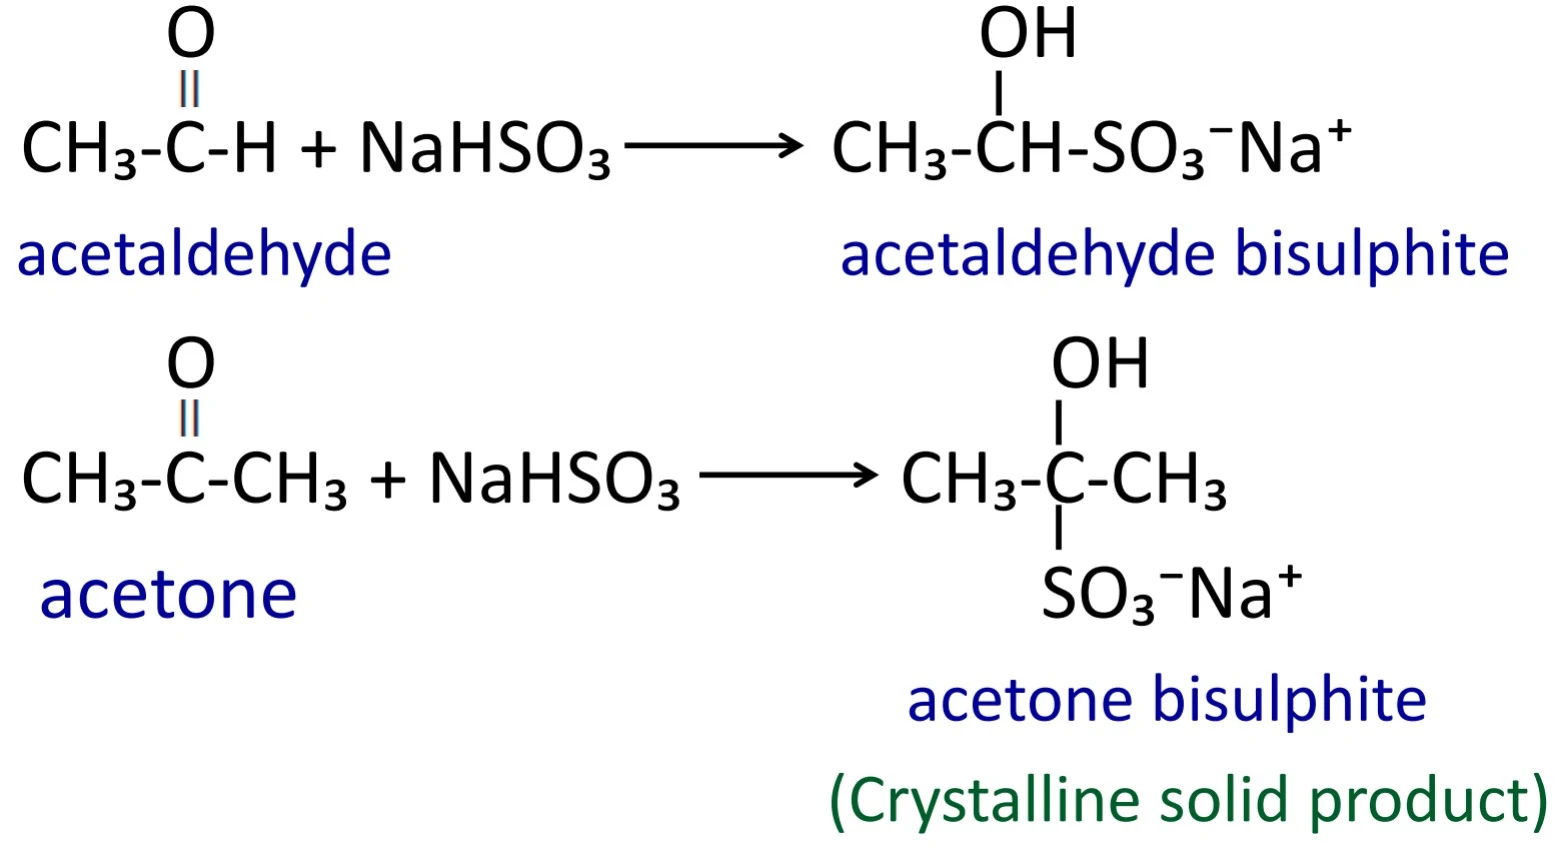 When aldehyde and ketone reacts with sodium bisulfite then crystalline solid of addition product is formed.